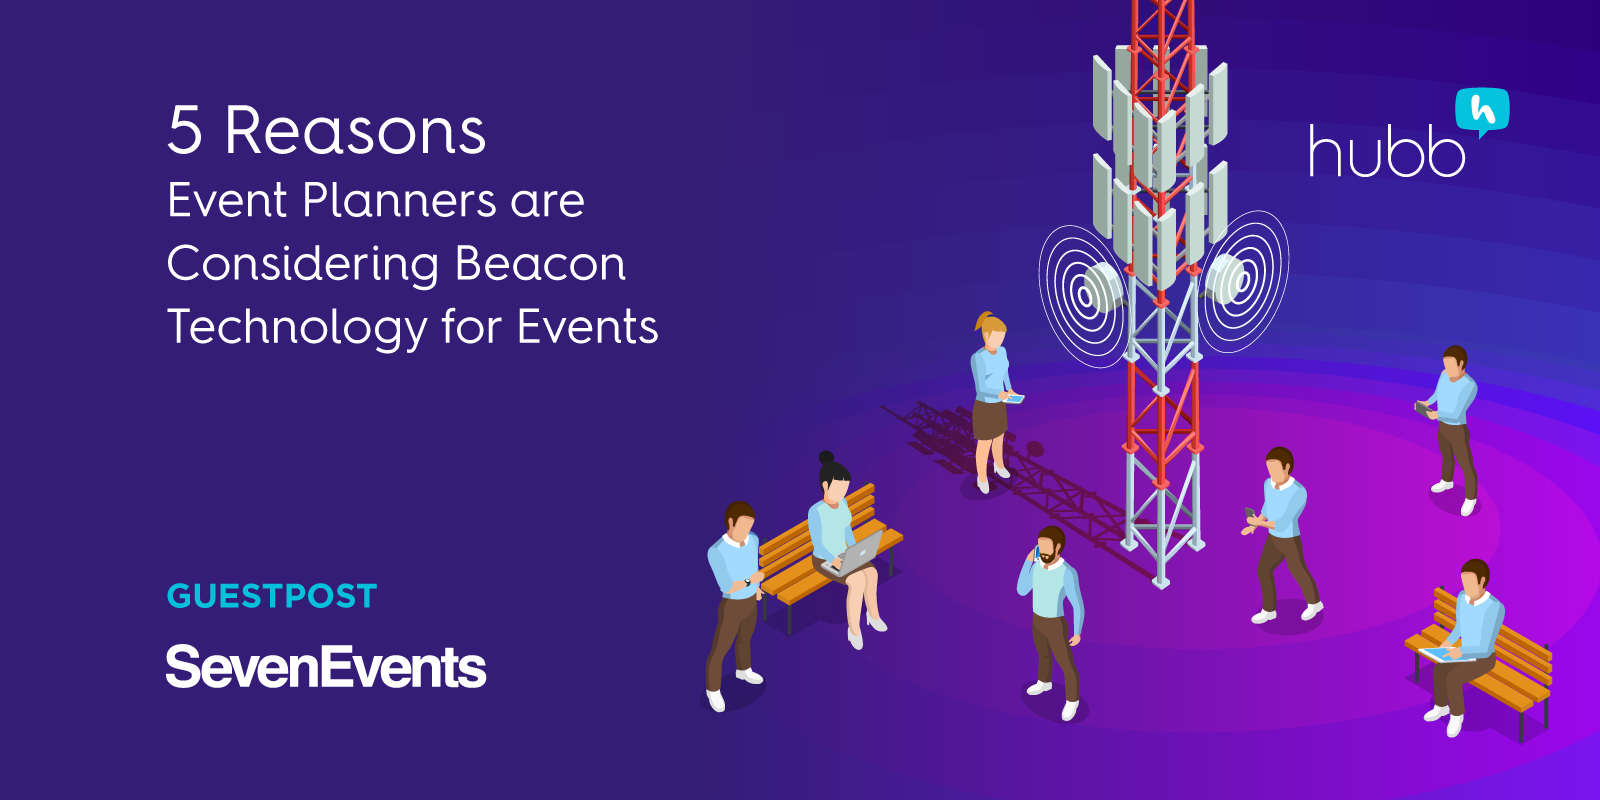 5 Reasons Event Planners are Considering Beacon Technology for Events